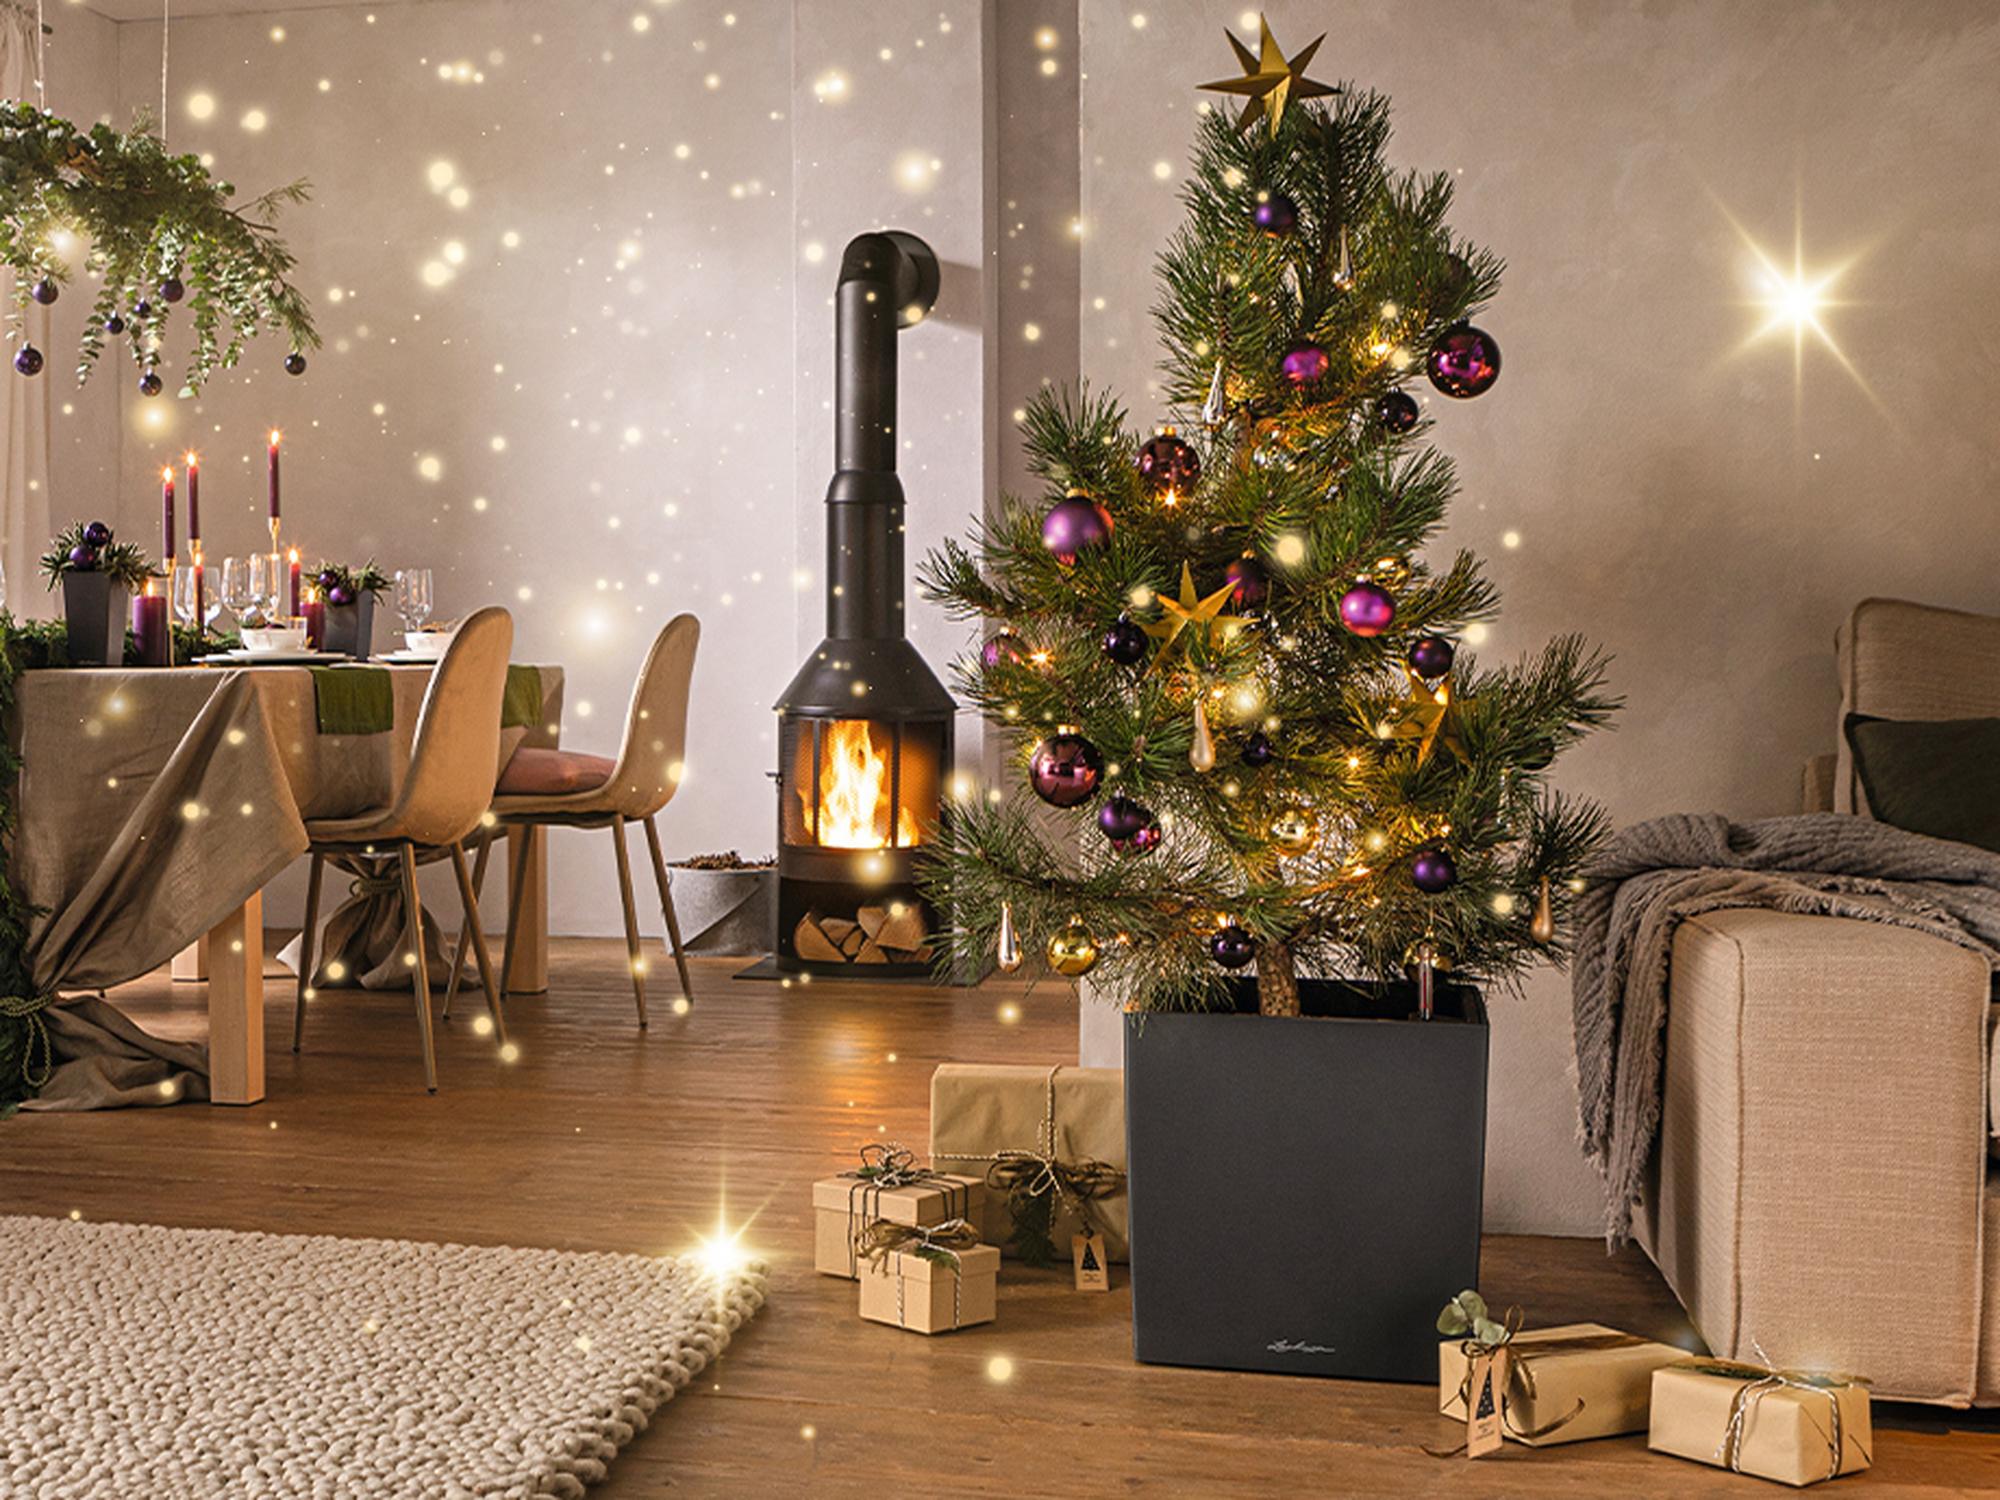 Enhance your home for a very special Christmas